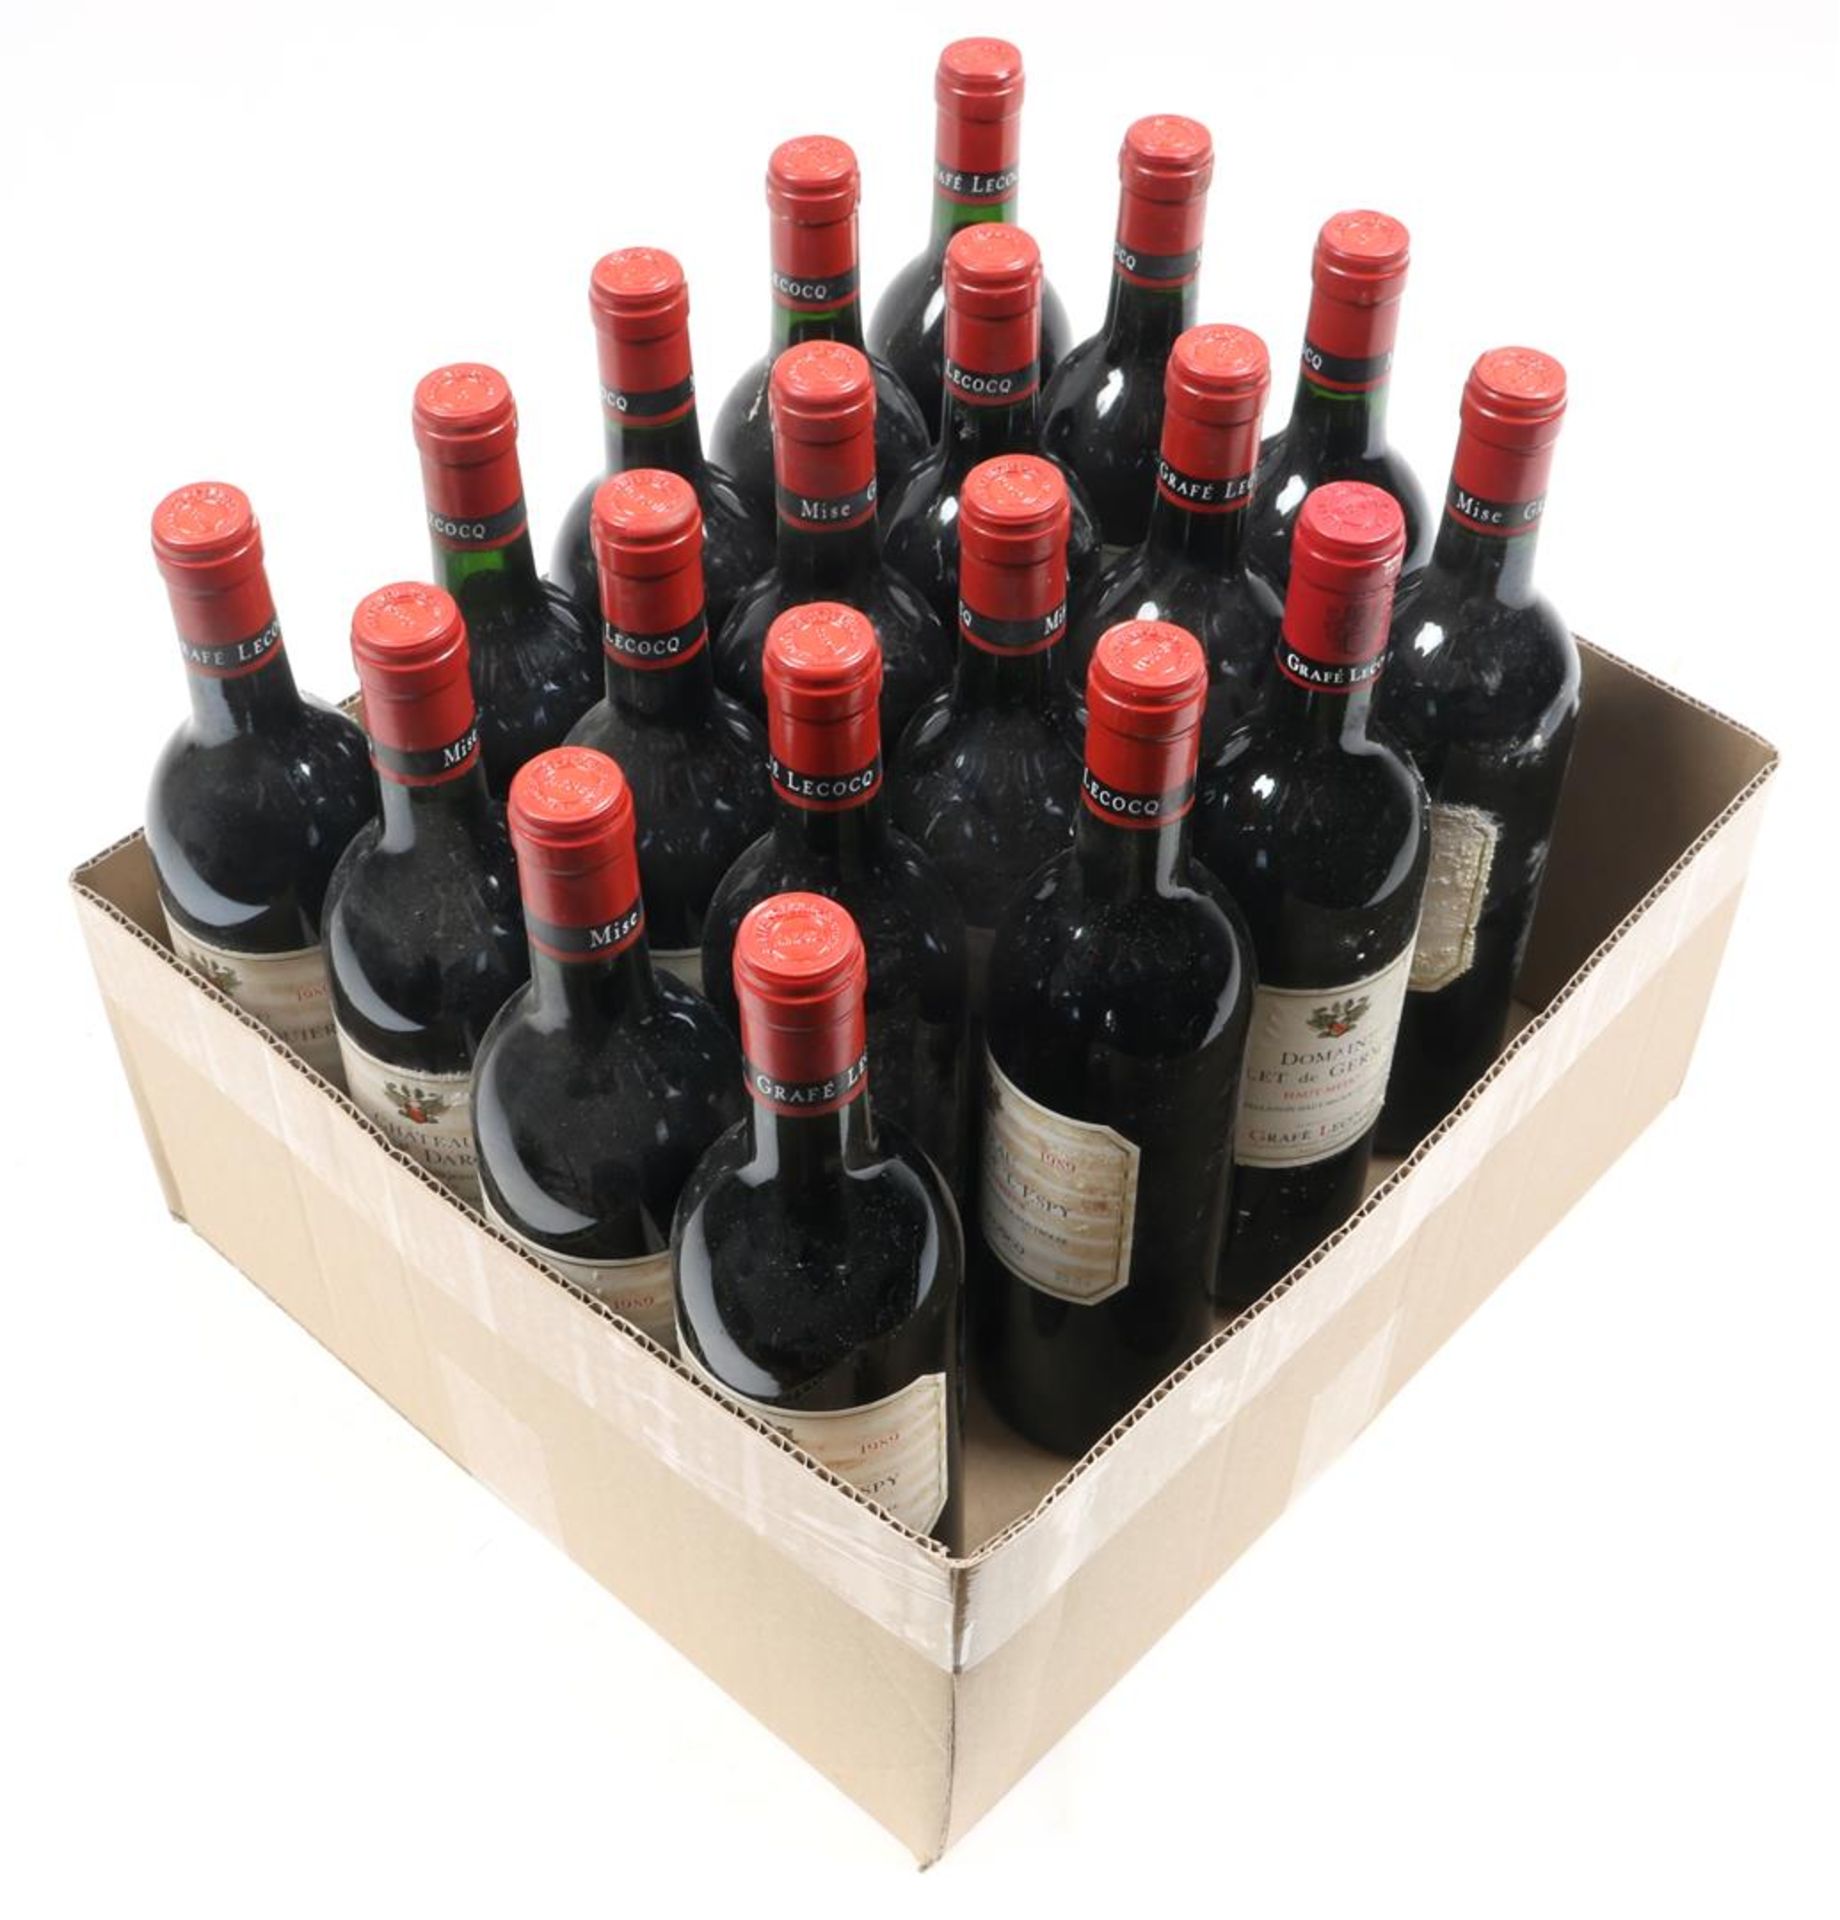 19 bottles of red wine including 16x Chateau L Estage Darquier grand poujeaux moulis & nbsp; from